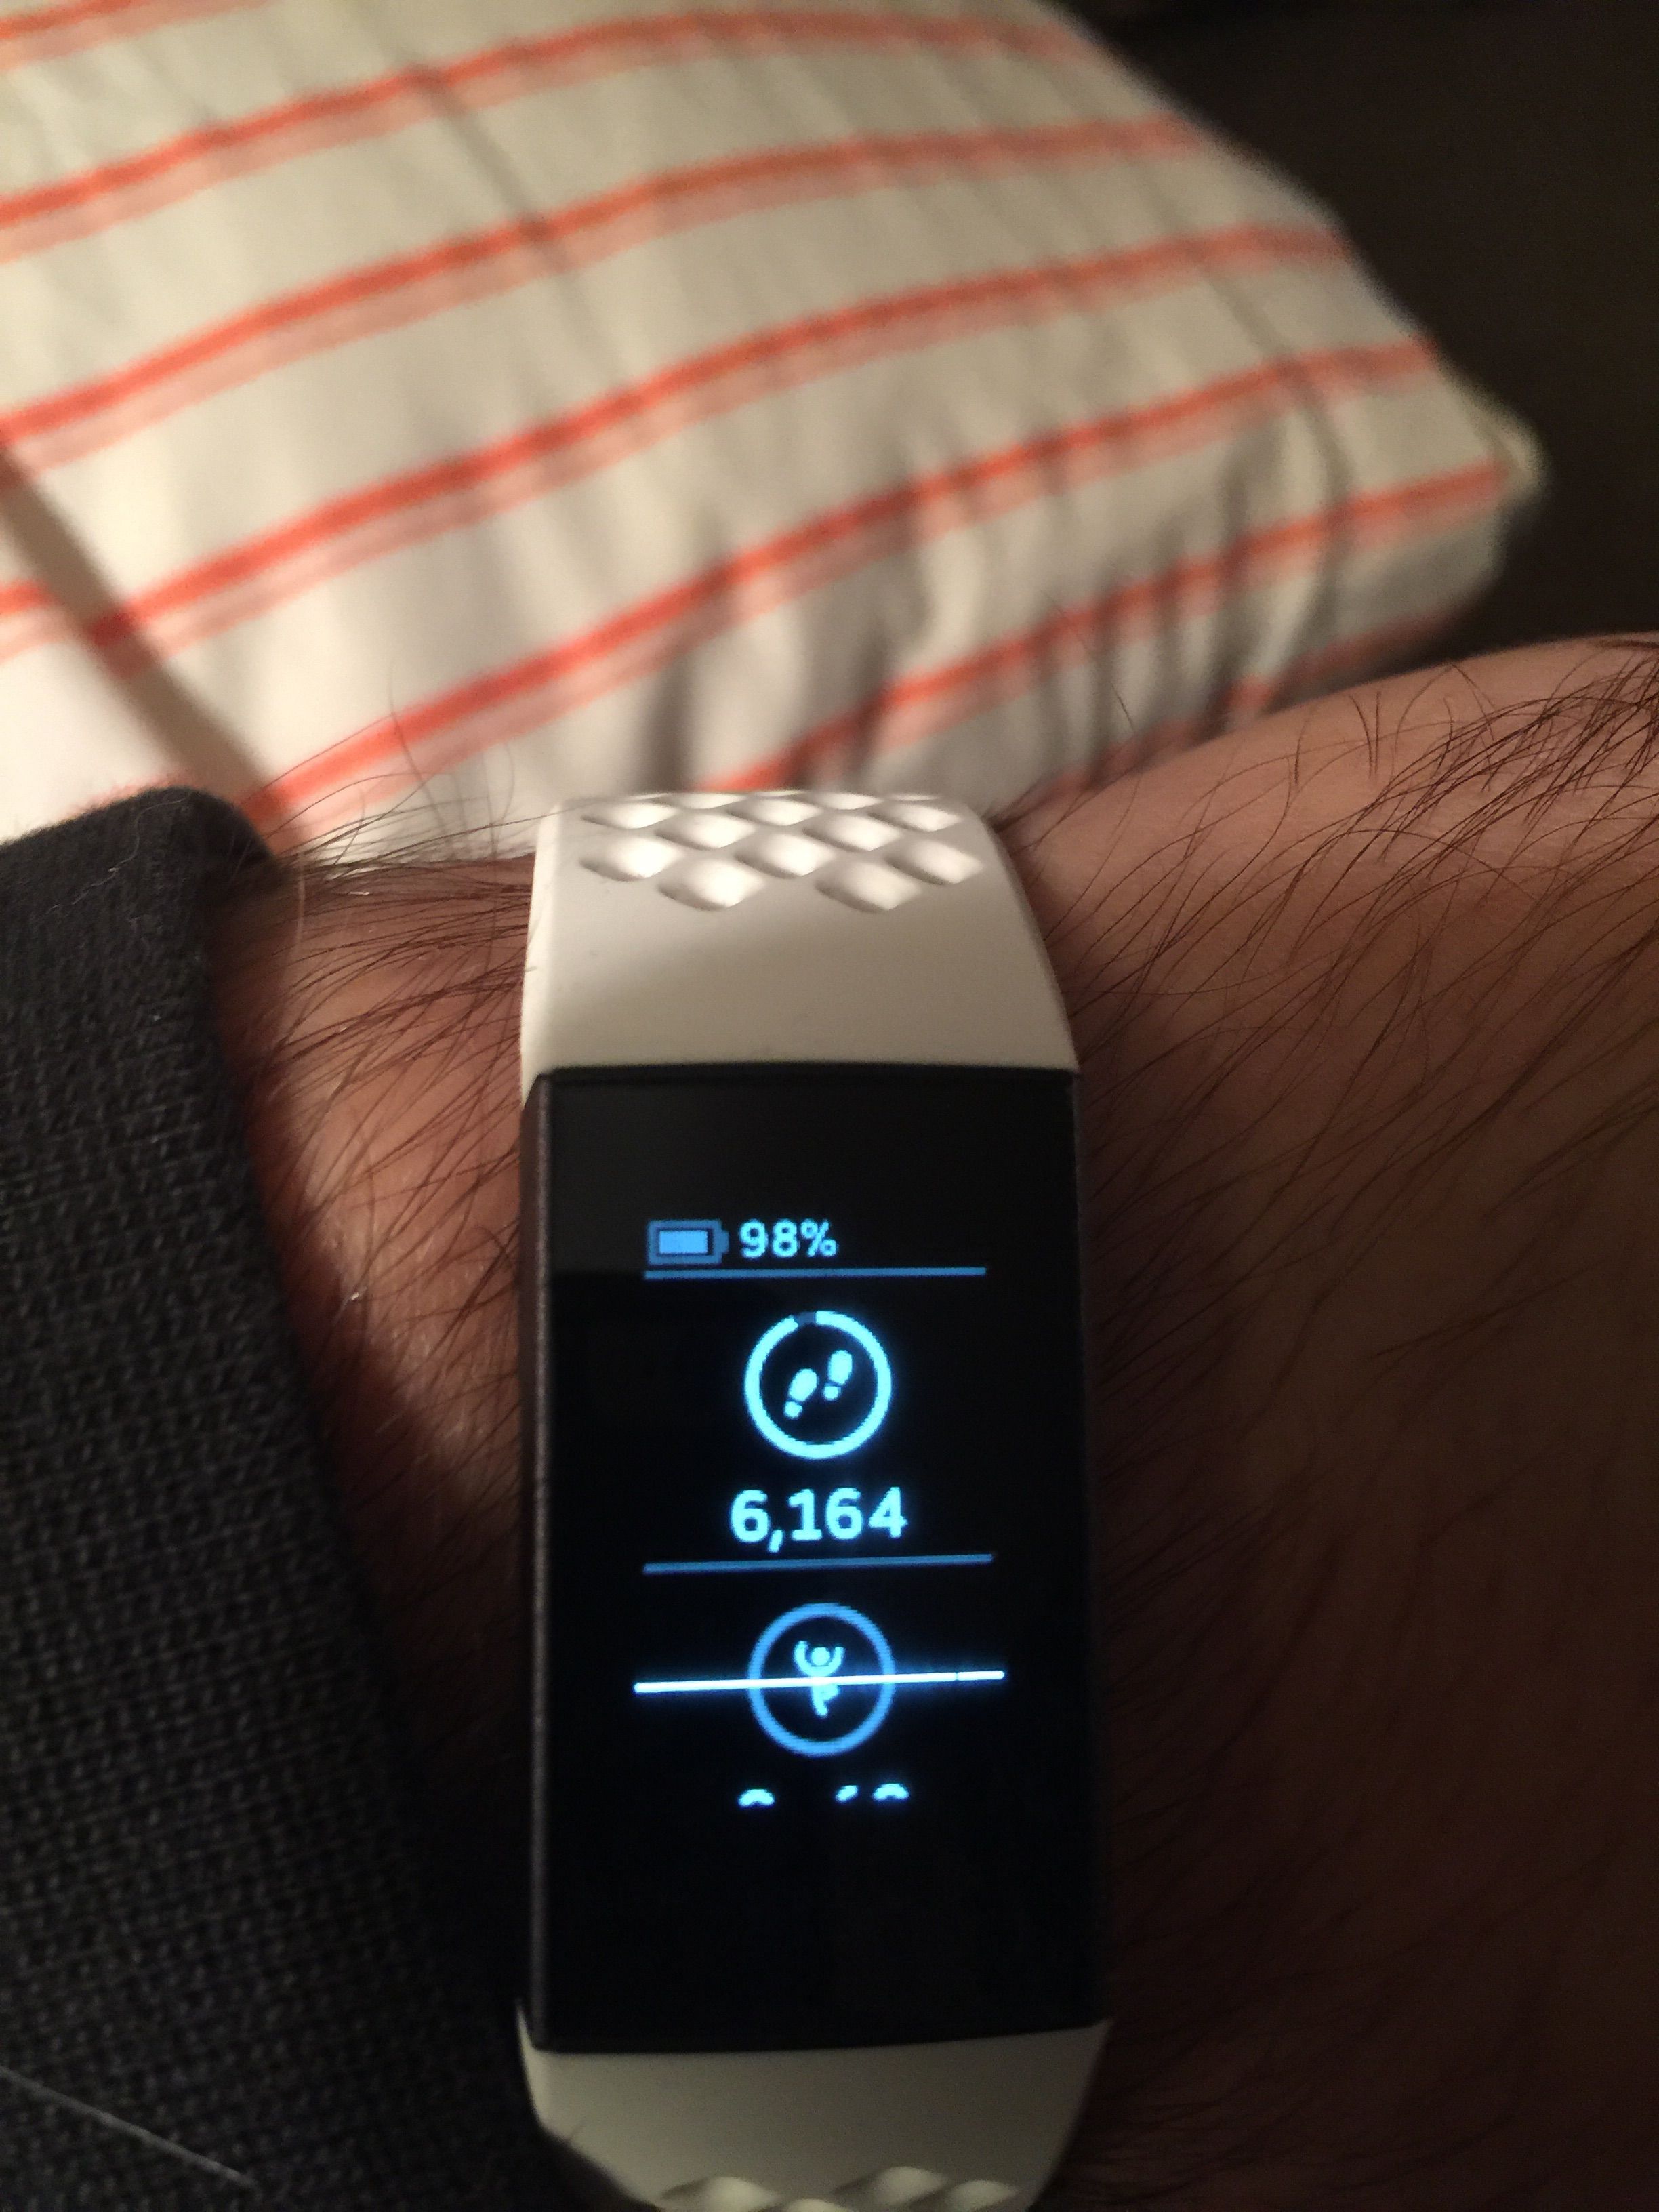 fitbit for samsung s8